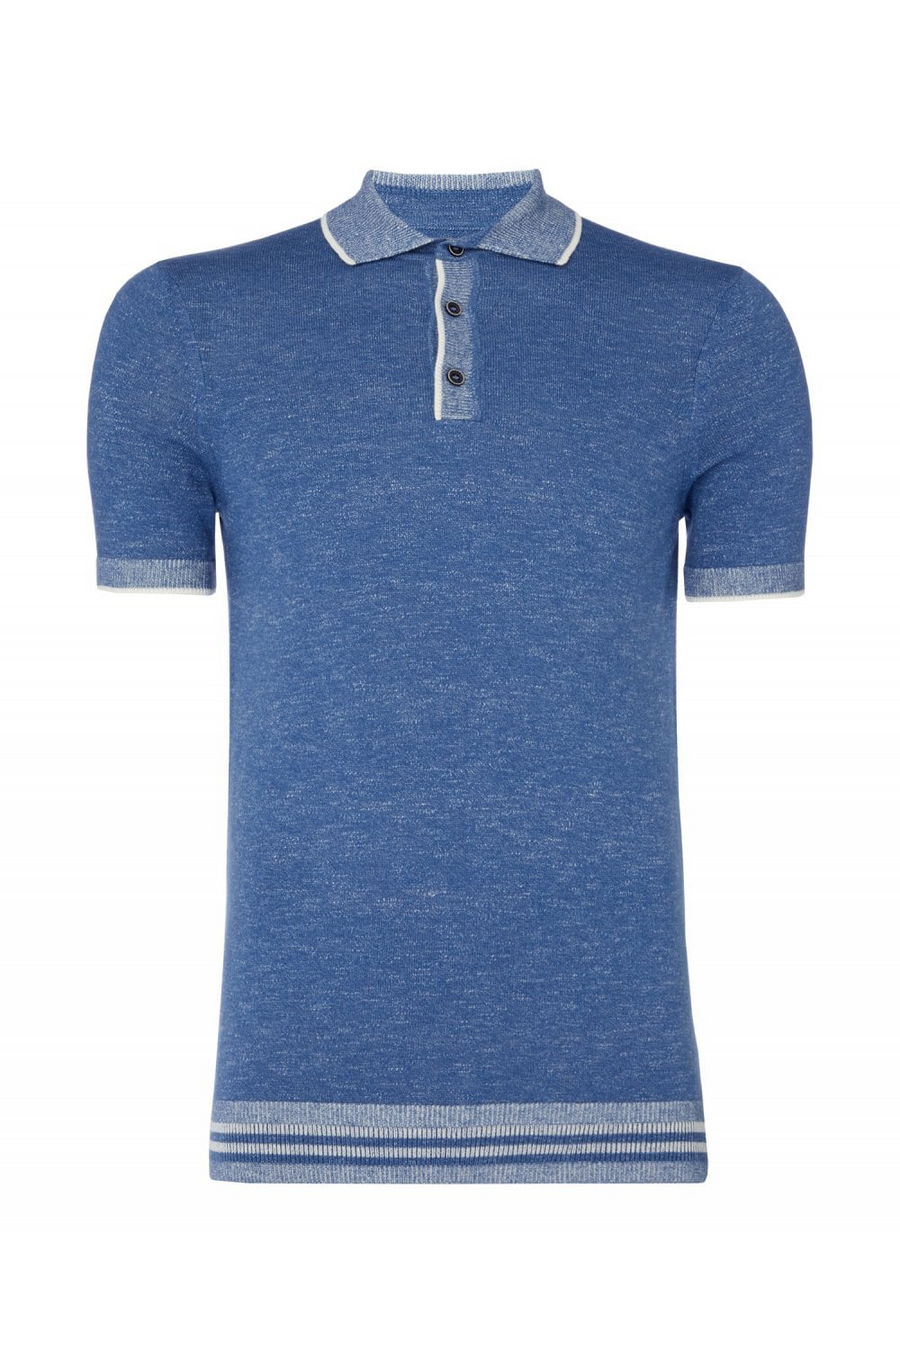 Buy the Remus Uomo Marl Knit Polo Light Blue at Intro. Spend £50 for free UK delivery. Official stockists. We ship worldwide.